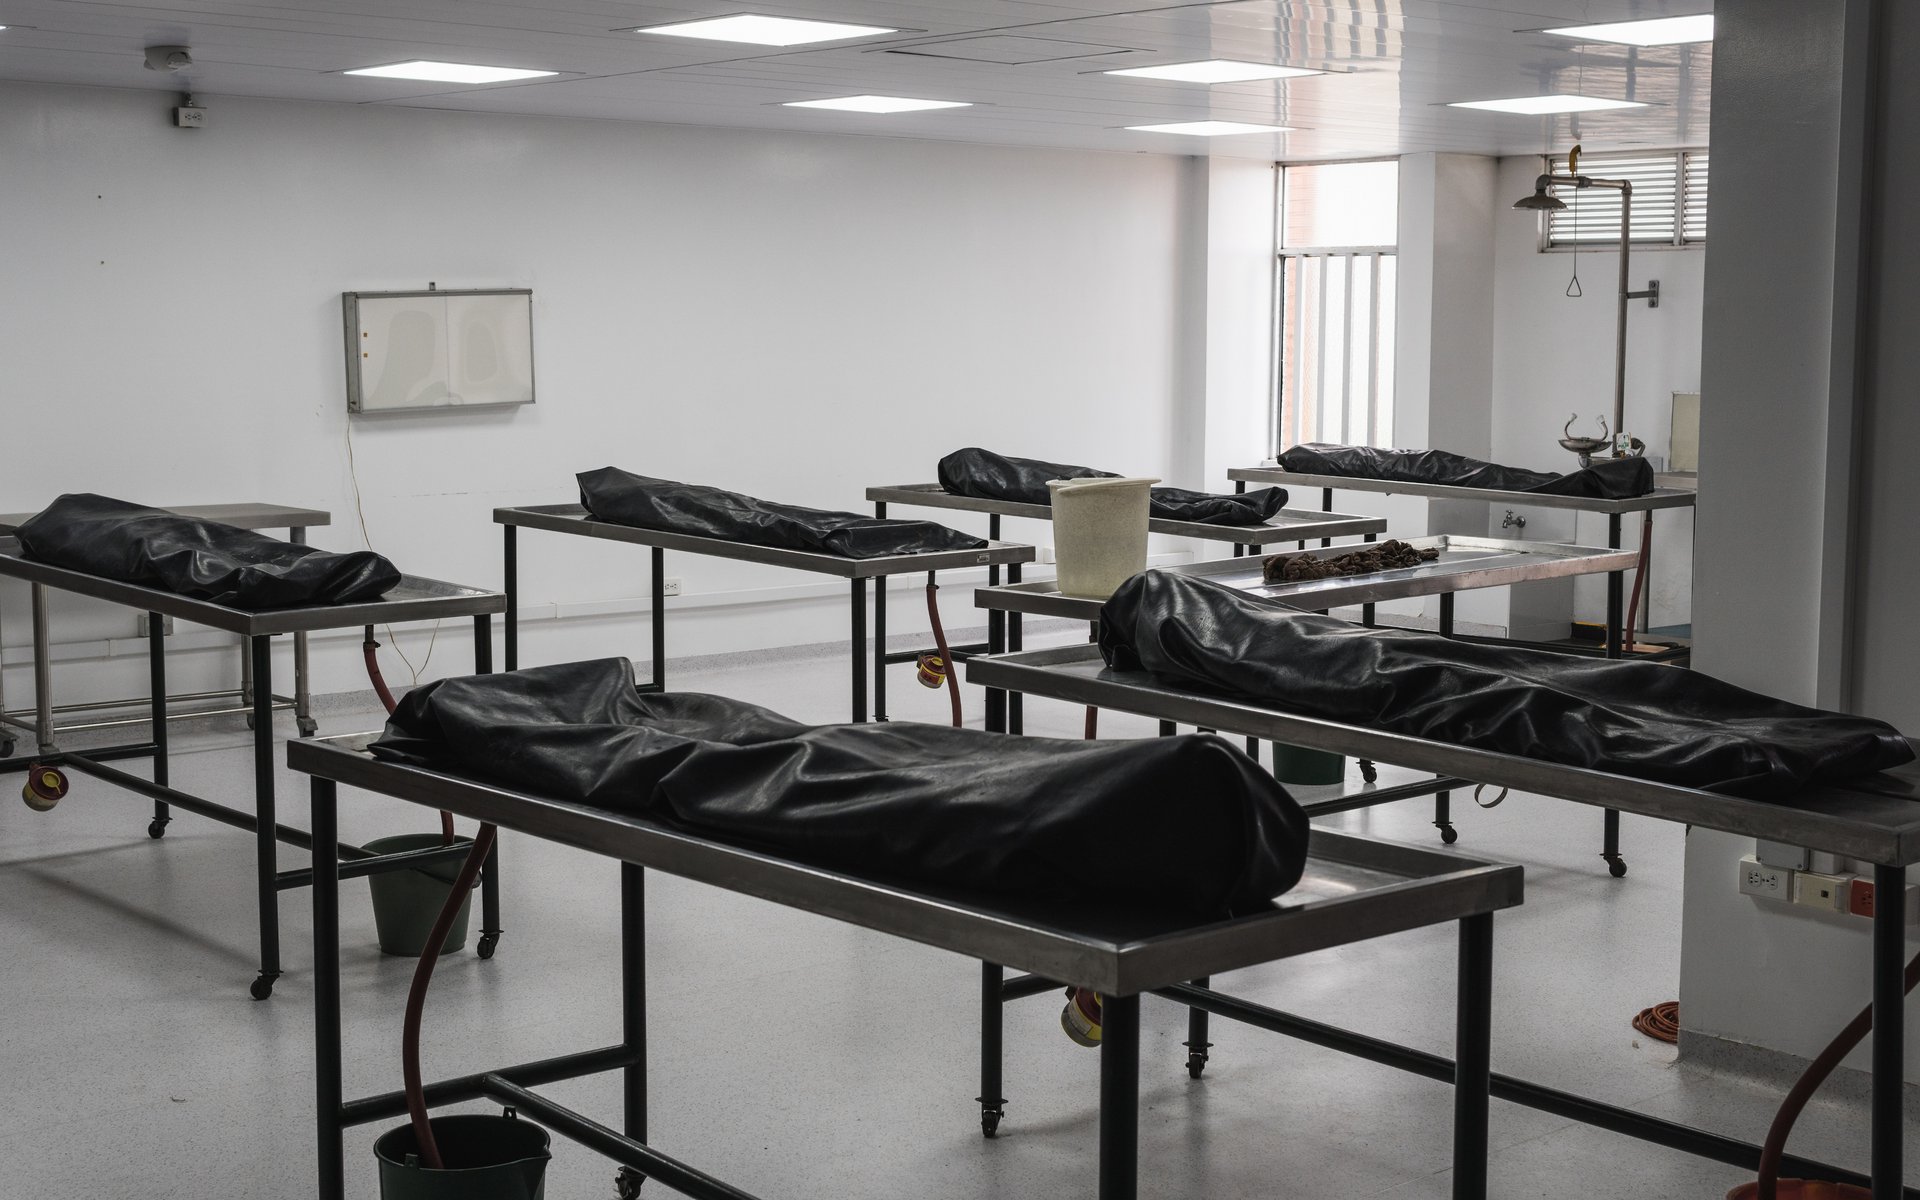 Armenia, Quindío / Colombia - June 23 2019: Corpses in a mortuary.